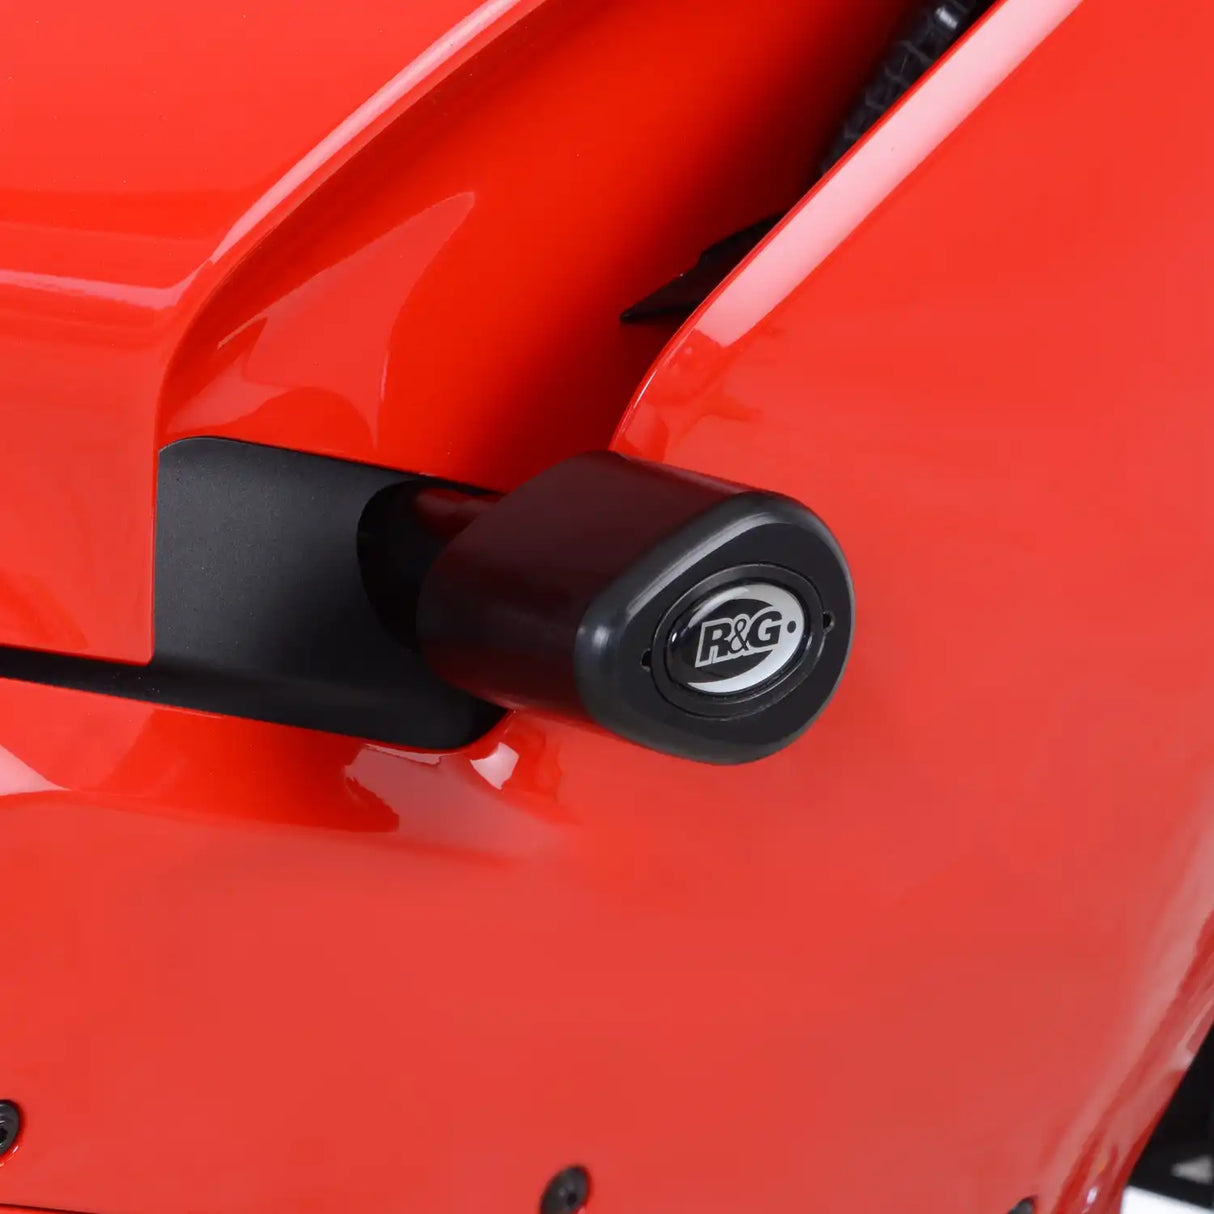 R&G Crash Protectors - Aero Style for Panigale V4 '17, V4S and Speciale '18- Drill kit (inner panel only)